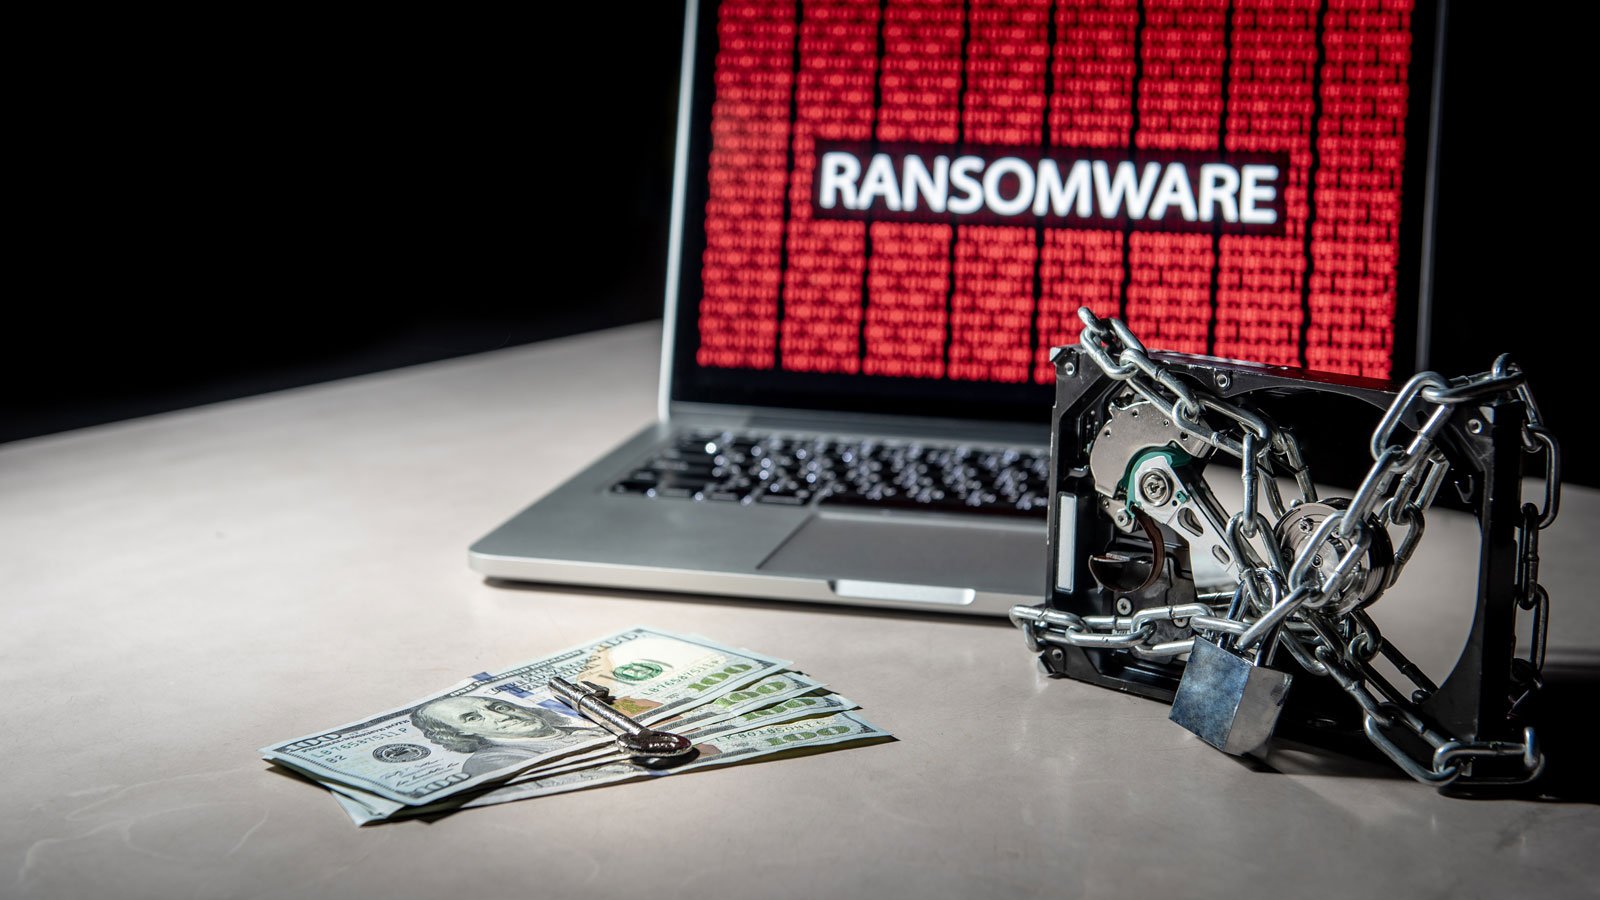 Ransomware in chains